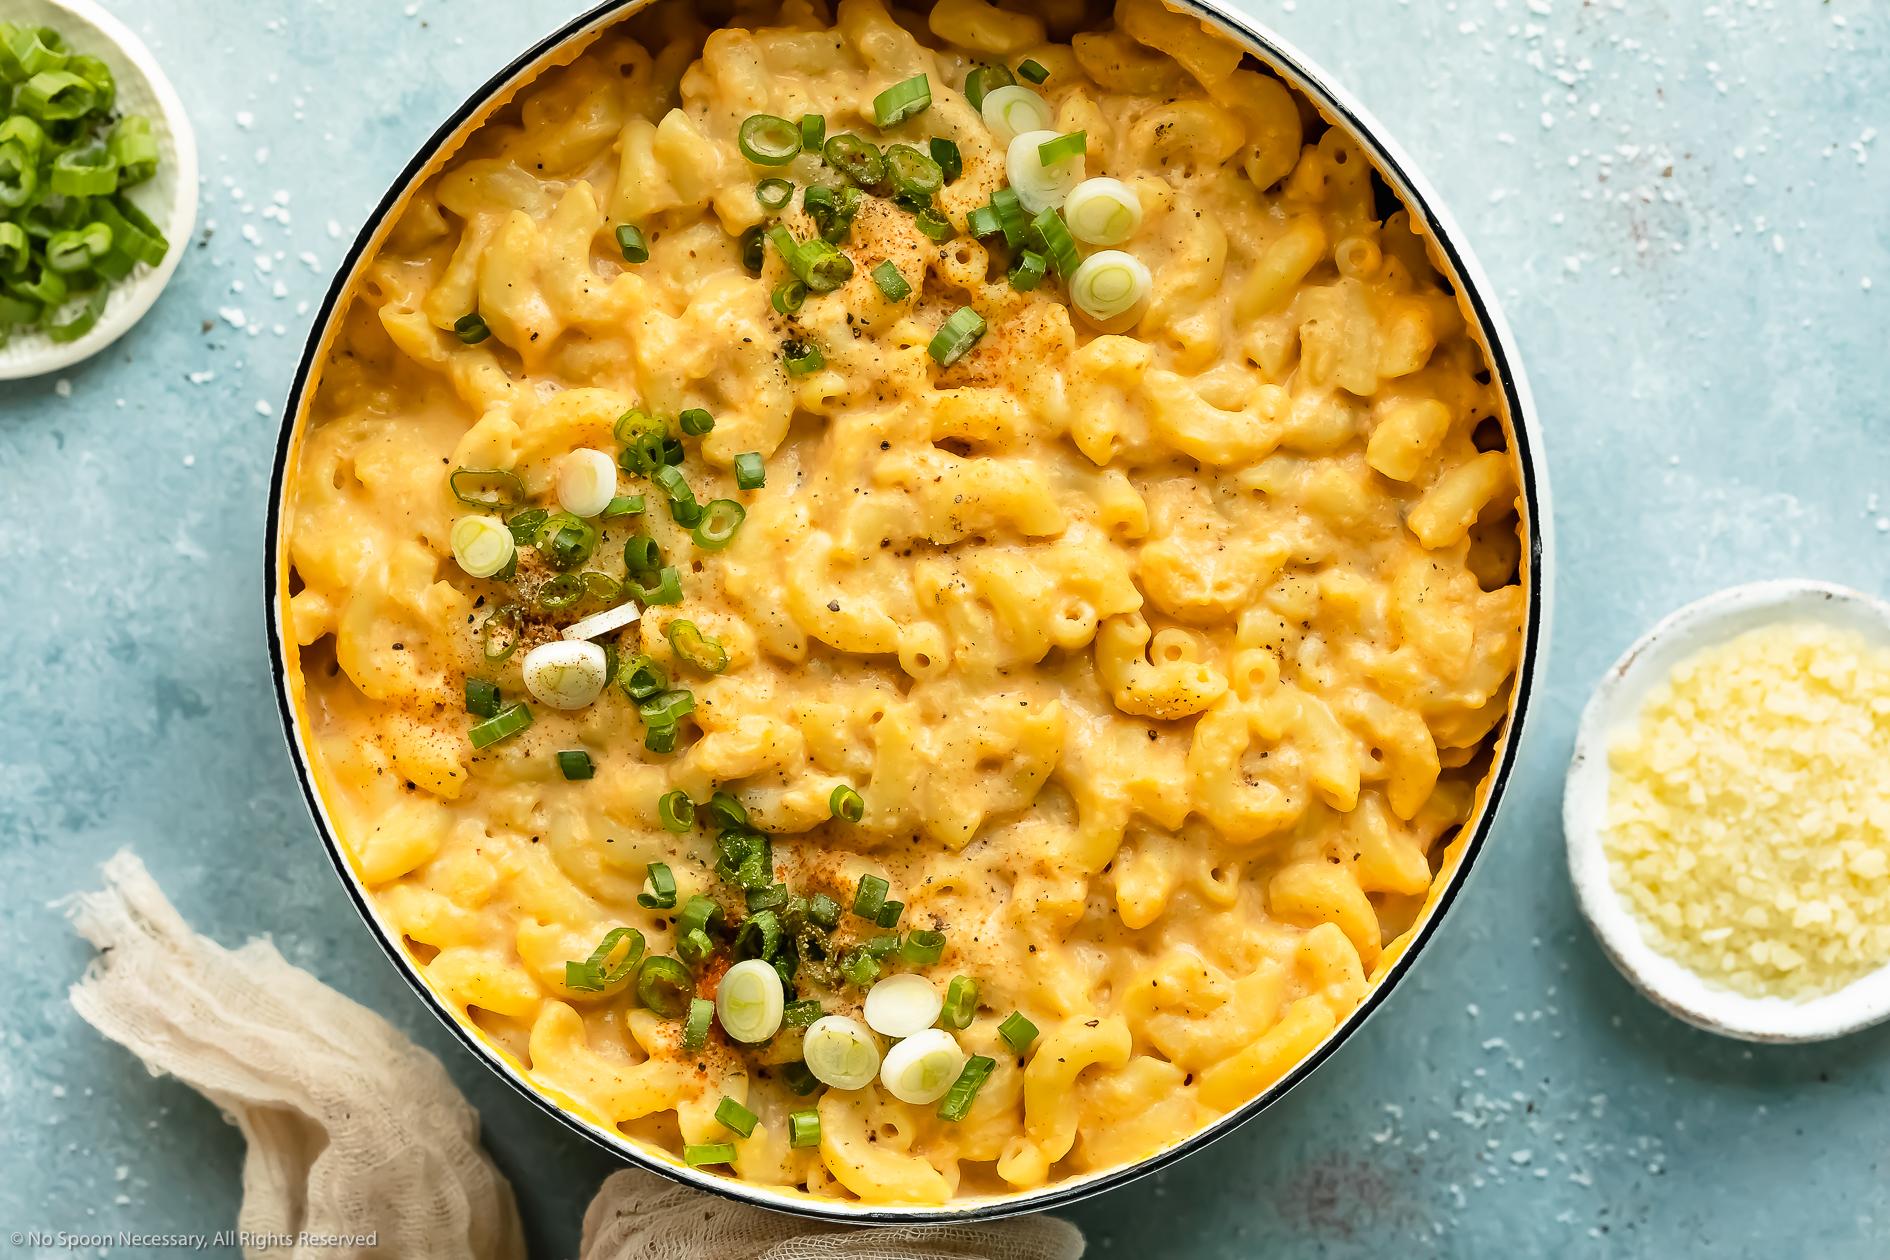 Easy-to-Make Light Macaroni and Cheese: Your Go-To Comfort Food